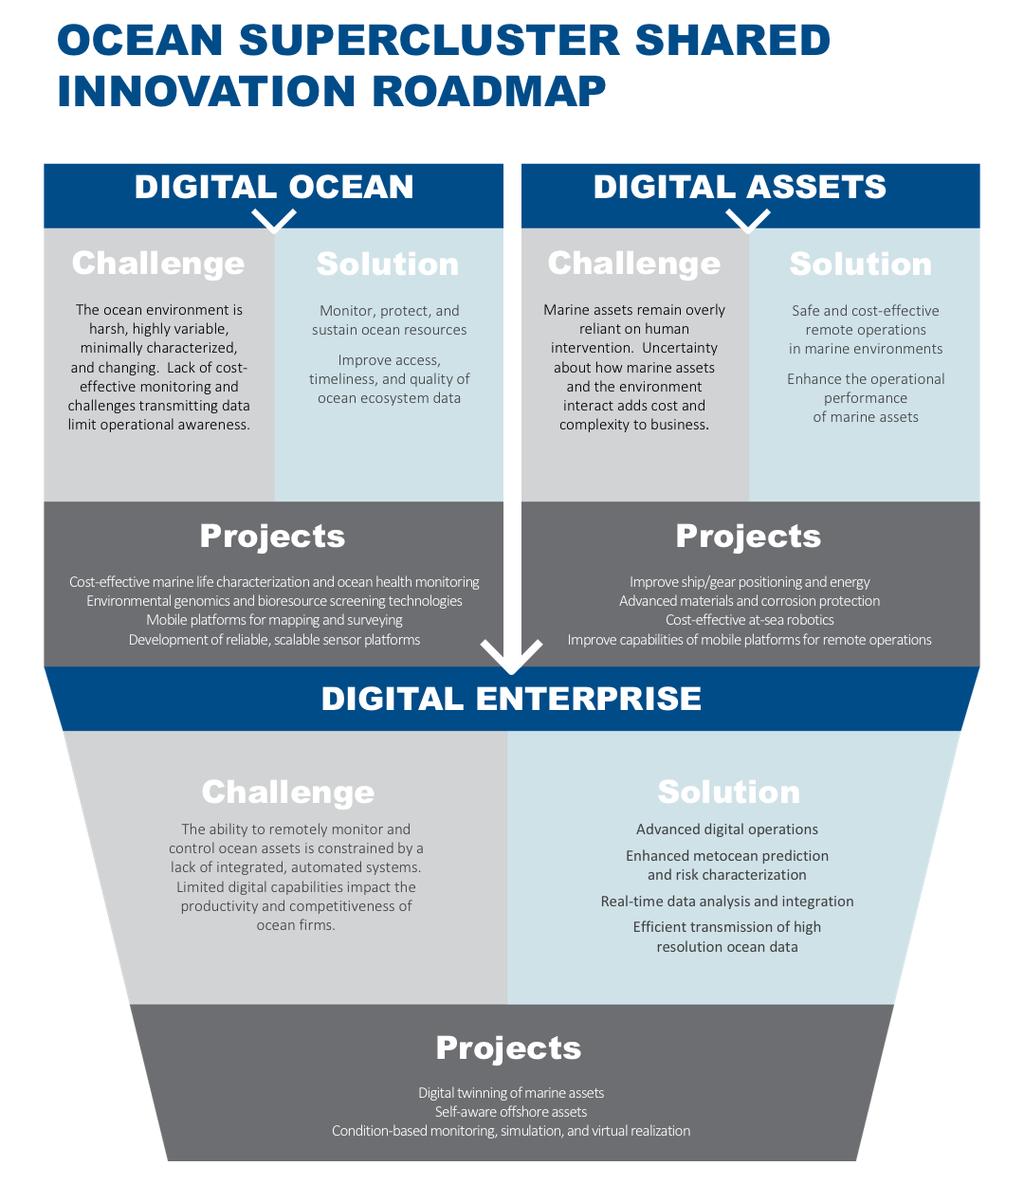 Figure 2: Shared Innovation Roadmap for Technology Leadership Digital Ocean Assets Ocean-based assets, particularly those in the North Atlantic, whether ships, production platforms, subsea